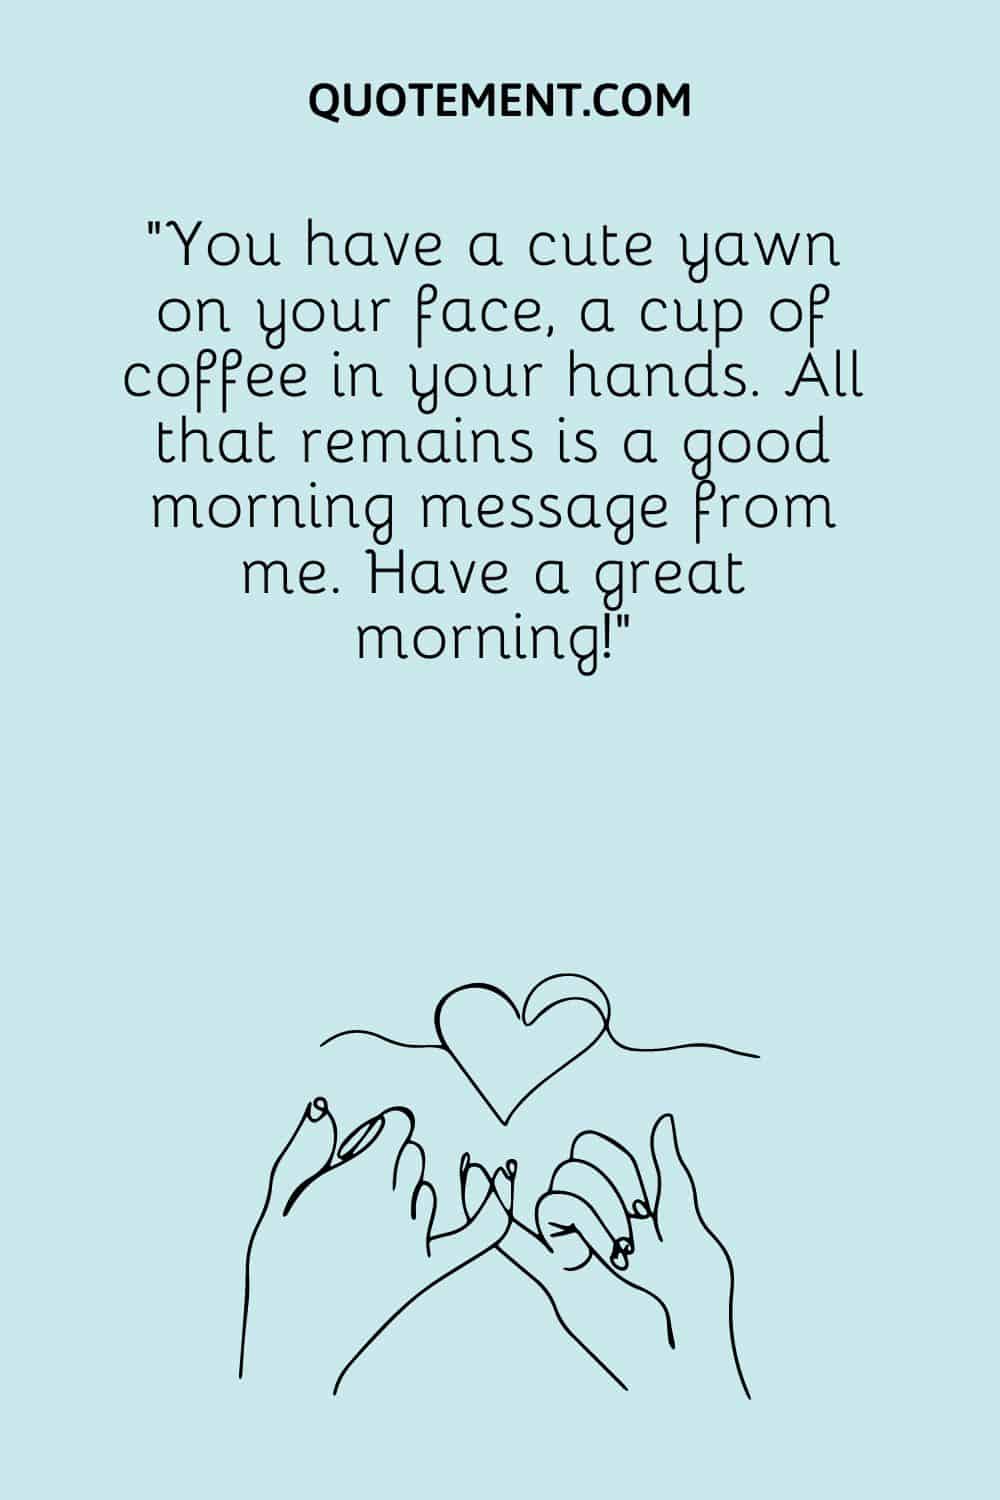 You have a cute yawn on your face, a cup of coffee in your hands